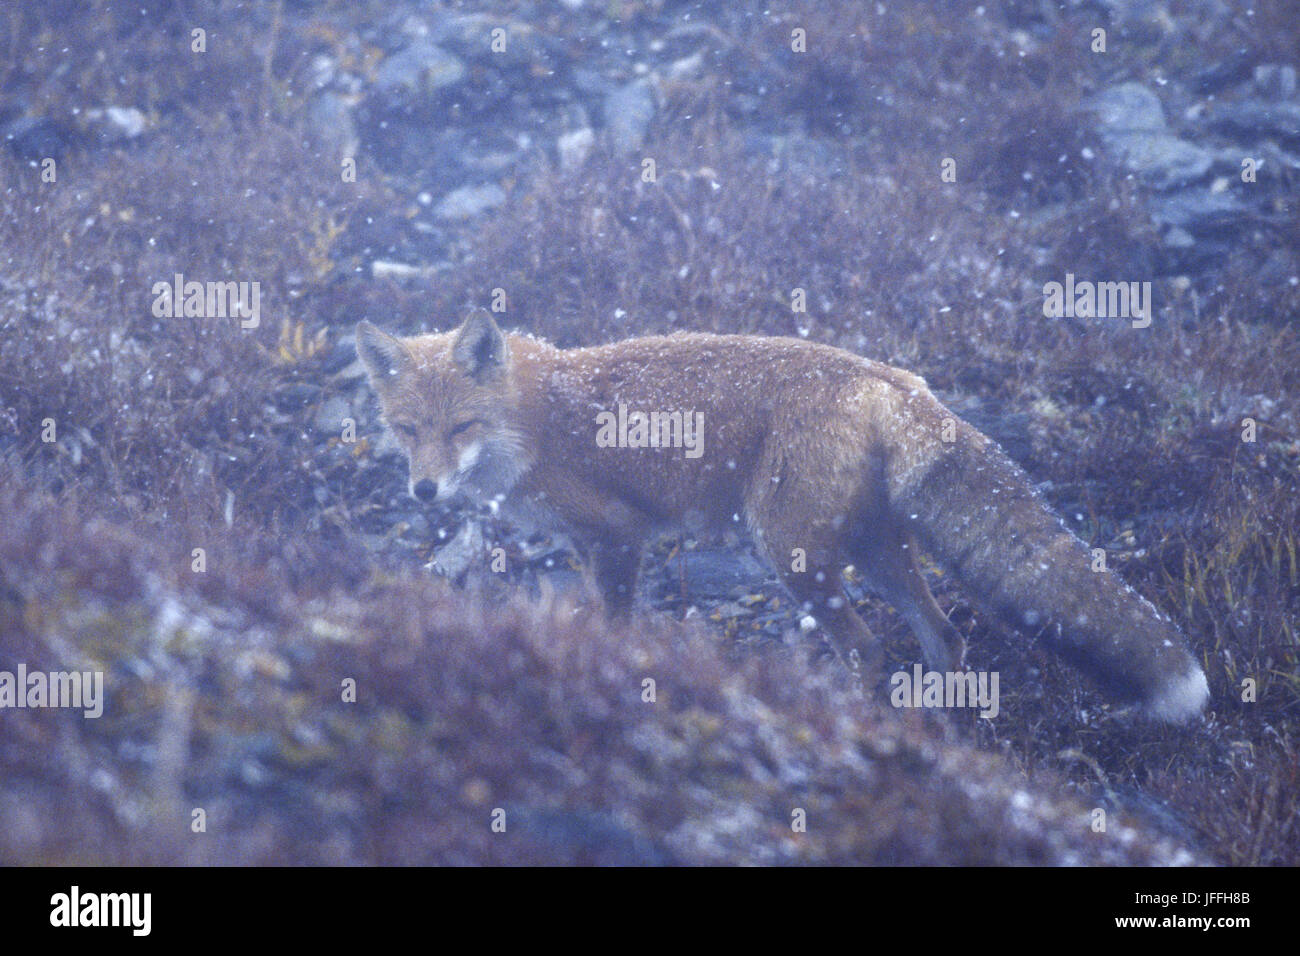 Red Fox in scurry of snow Stock Photo